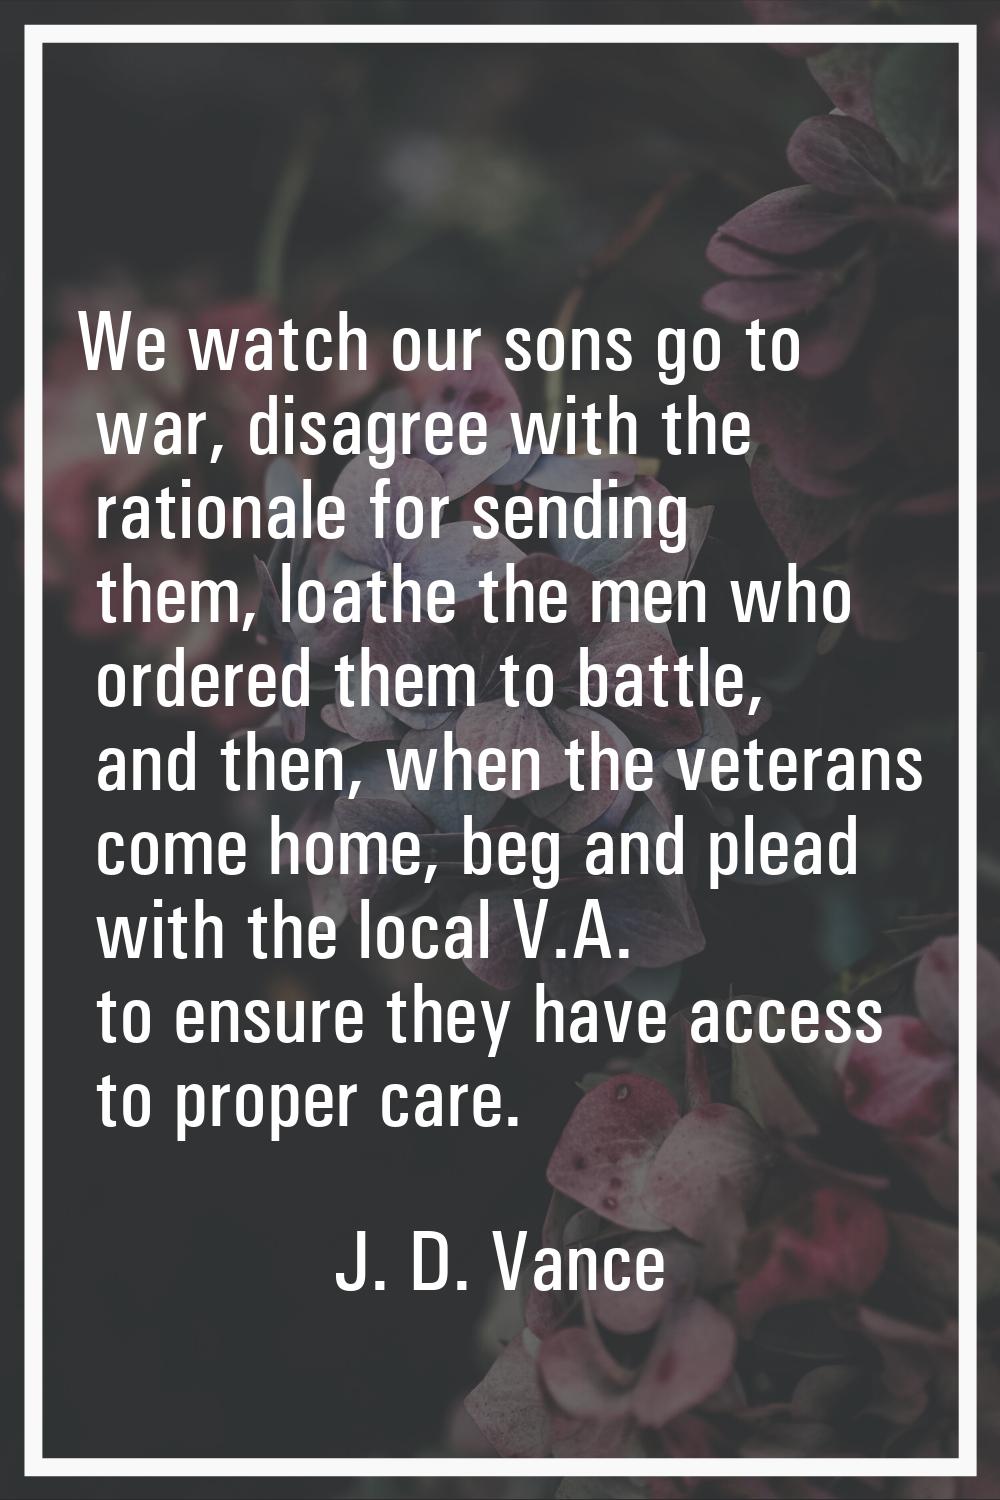 We watch our sons go to war, disagree with the rationale for sending them, loathe the men who order